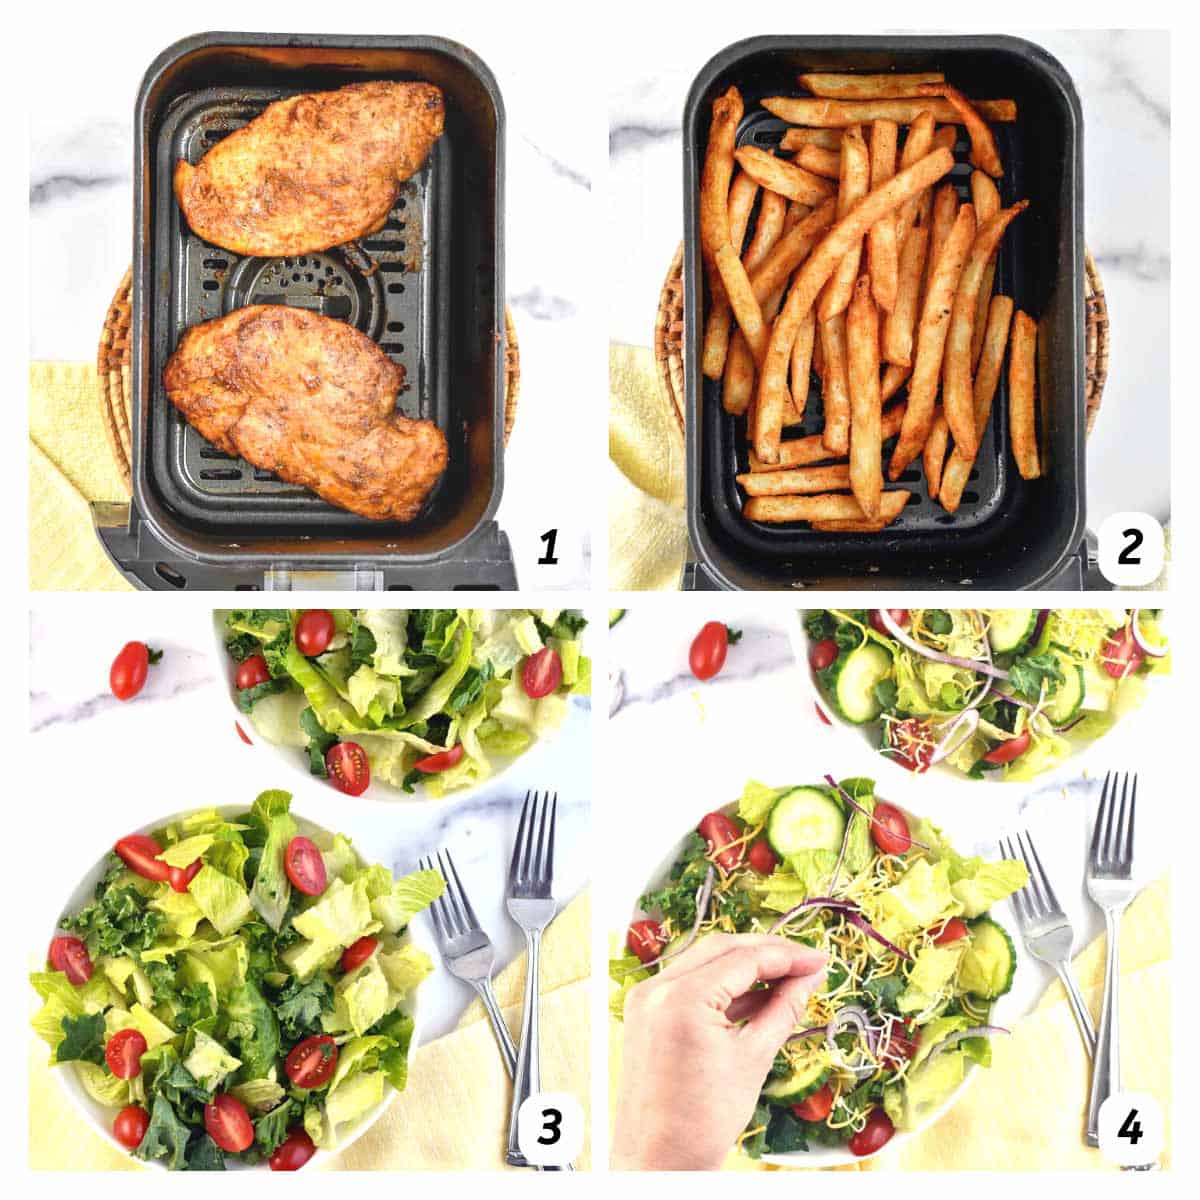 Four panel grid of process shots 1-4 - air frying chicken cutlets and French fries, and beginning to assemble salad.